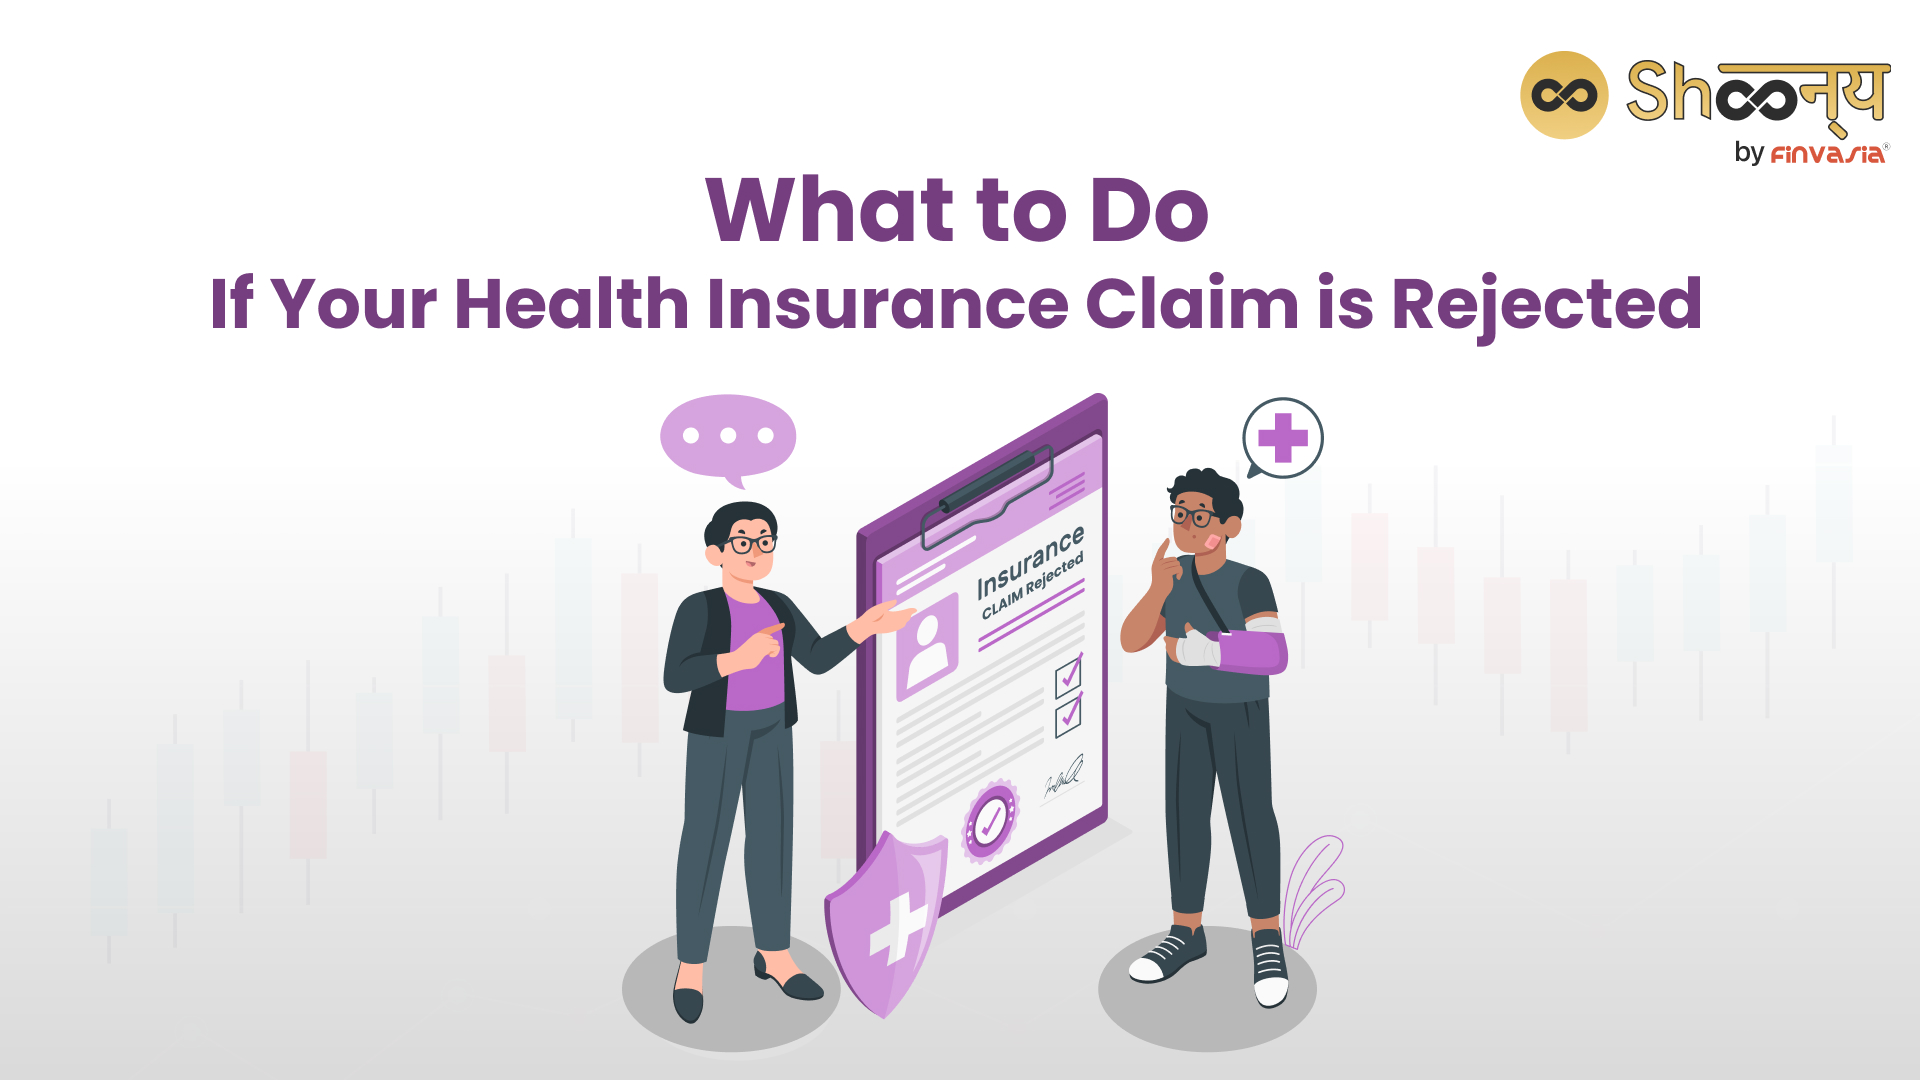 Insurance Claim Rejection: 7 Ways to Avoid Hassles